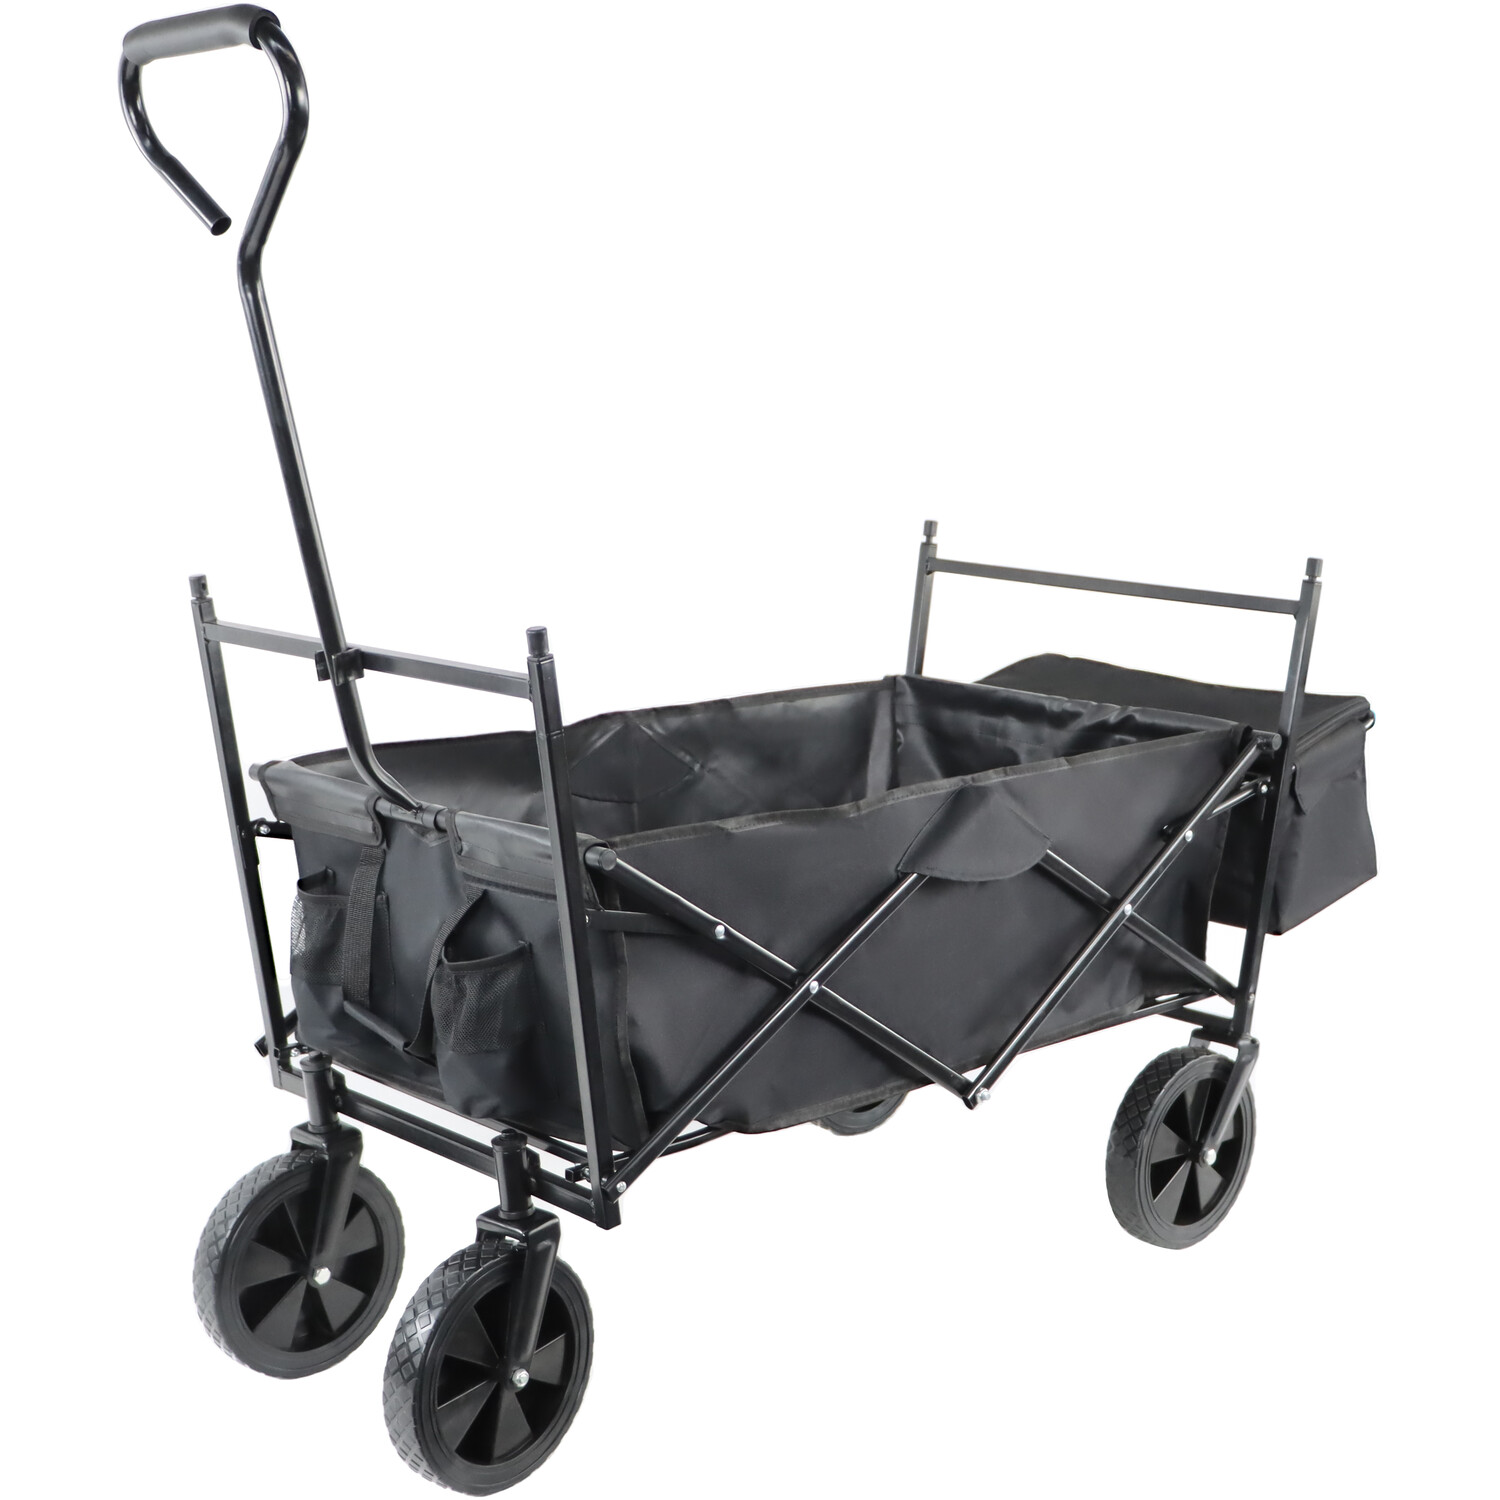 Foldable Trolley with Canopy - Black Image 4